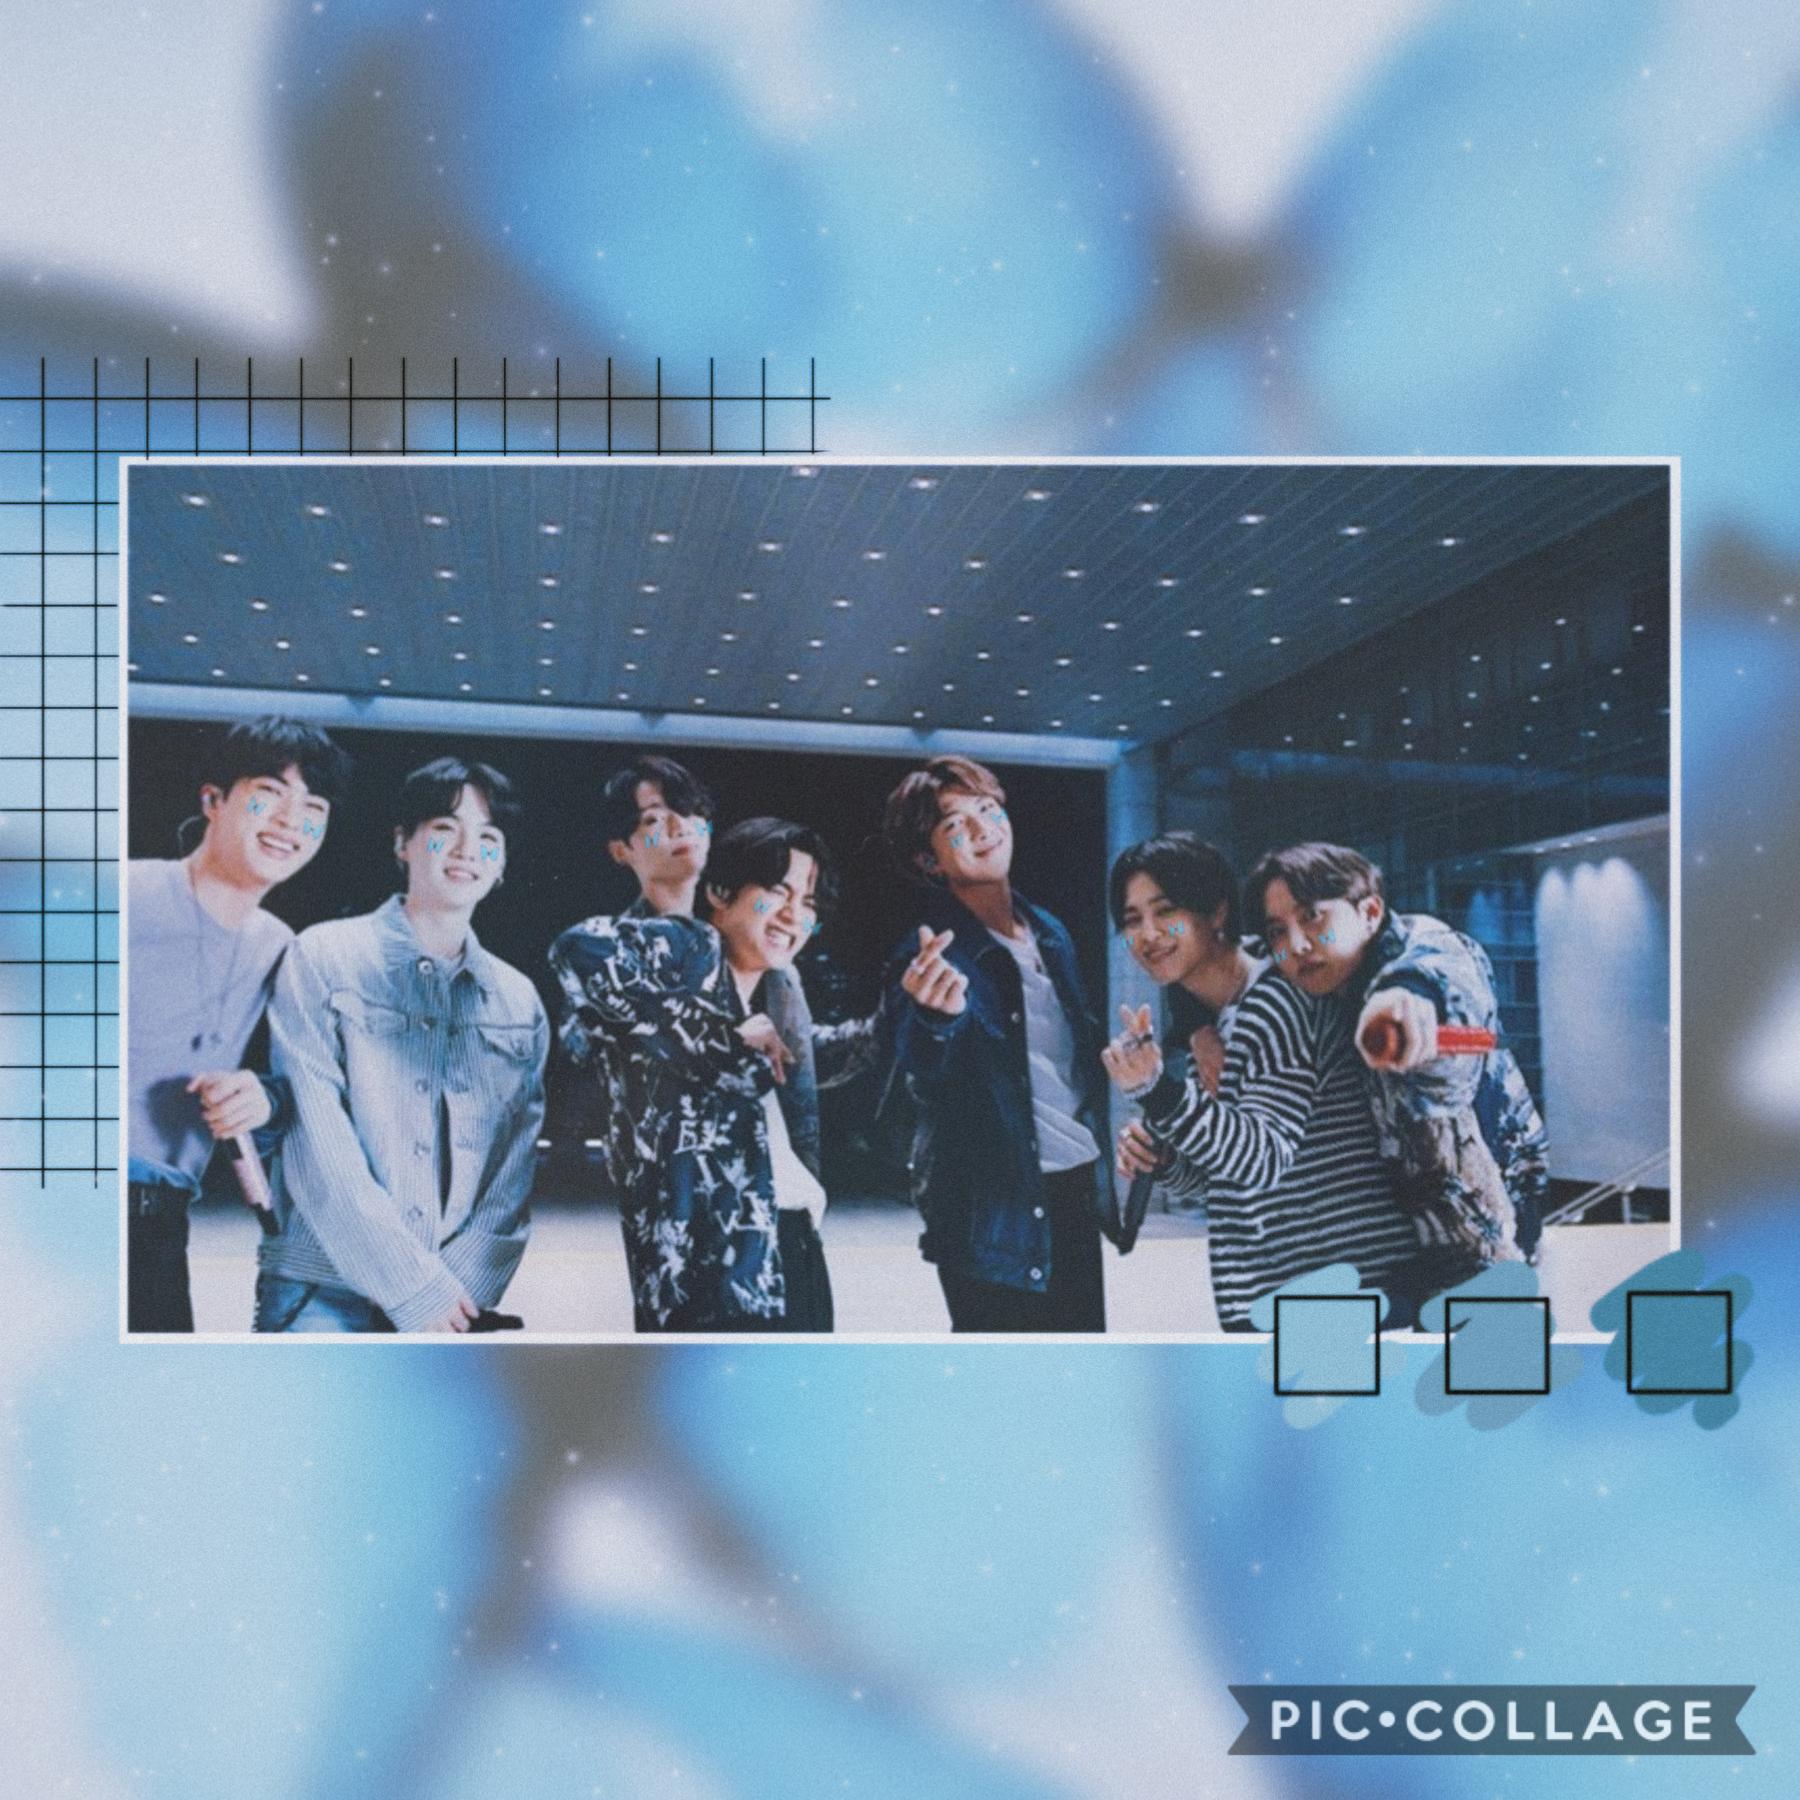 •💙•
Happy 7 Years BTS!!! 💜 We are so proud of the people you have become and will always support you. Always remember that ARMY loves you no matter what. Saranghae 💜💜